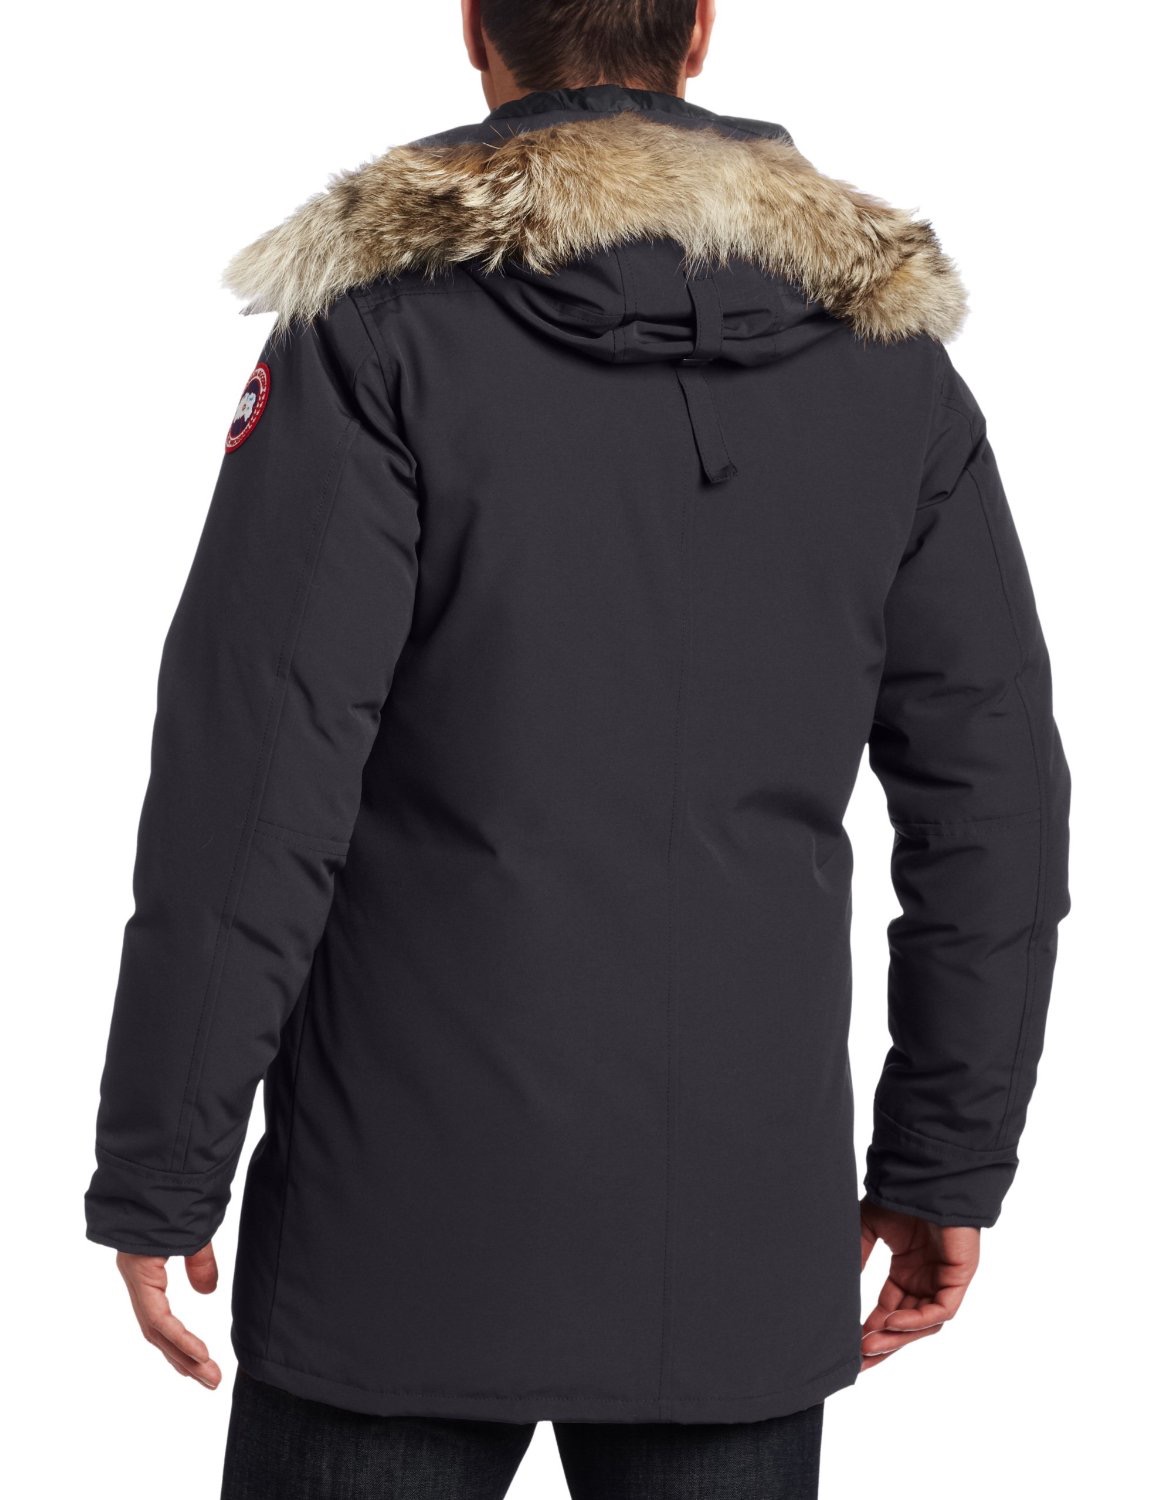 does canada goose jackets use real fur